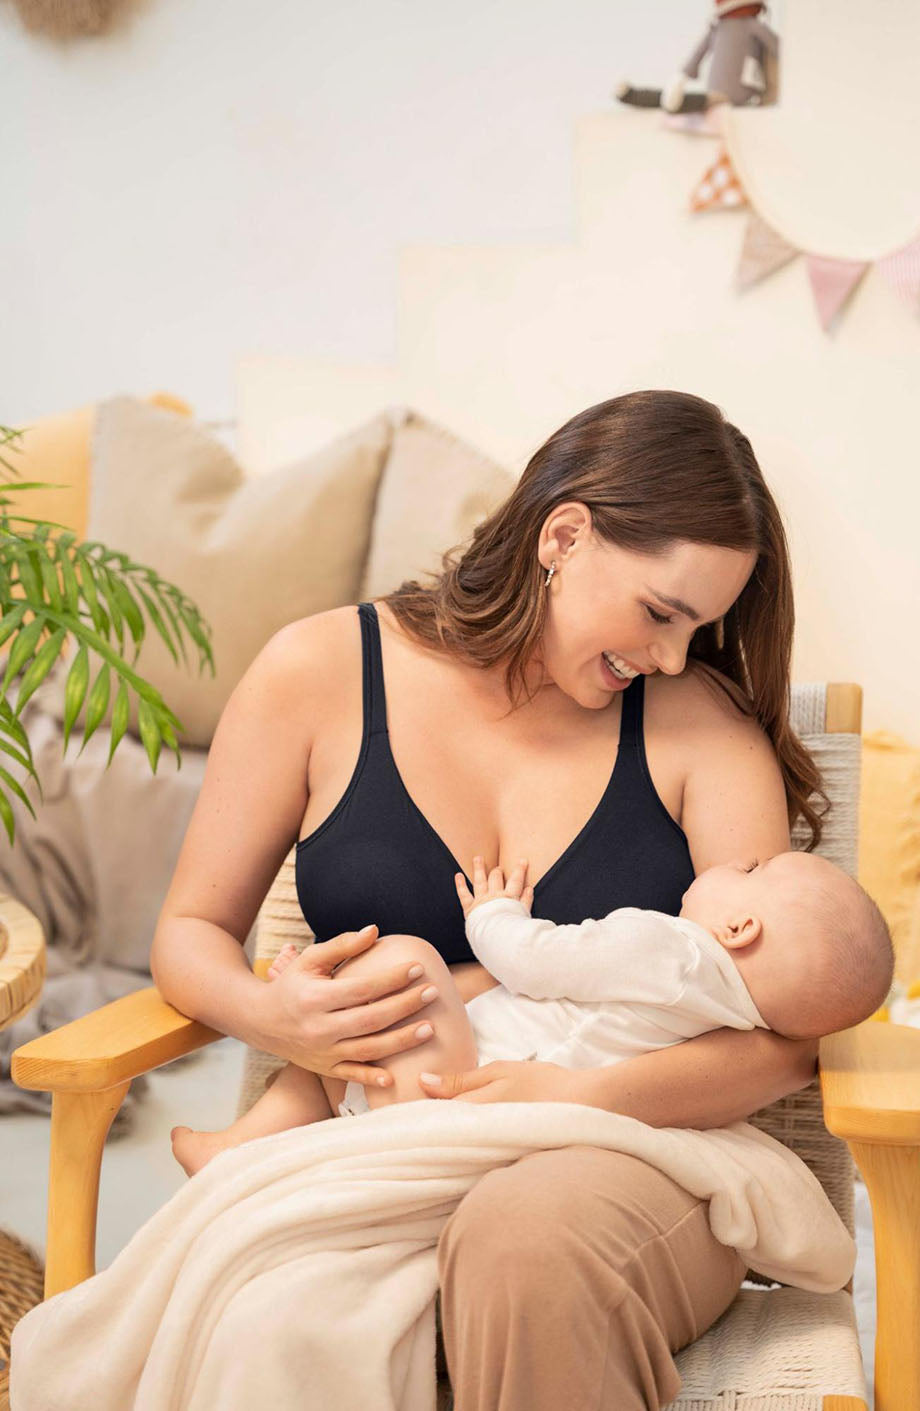 Shyaway.com - Explore the difference between normal bras and nursing bras.  The essential guide to knowing everything about the nursing bra is here.  Shop Now:  #NursingBraGuide #MaternityBraGuide  #BreastfeedingBra #shyaway